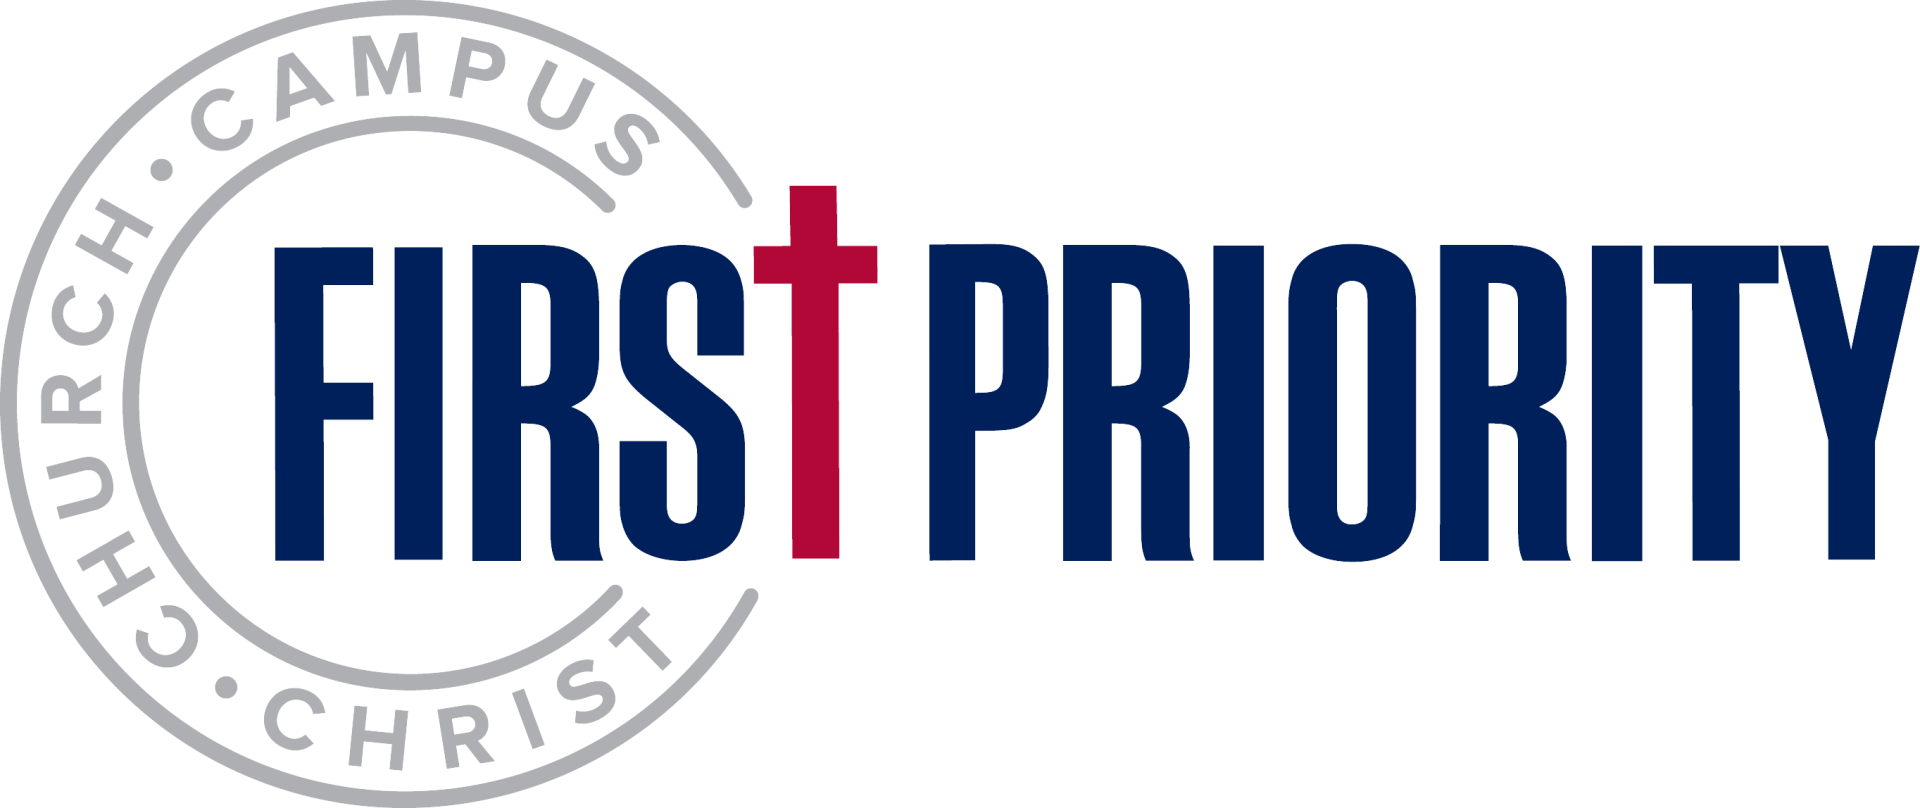 First Priority Student Ministry Logo, with red cross and a seal that says 